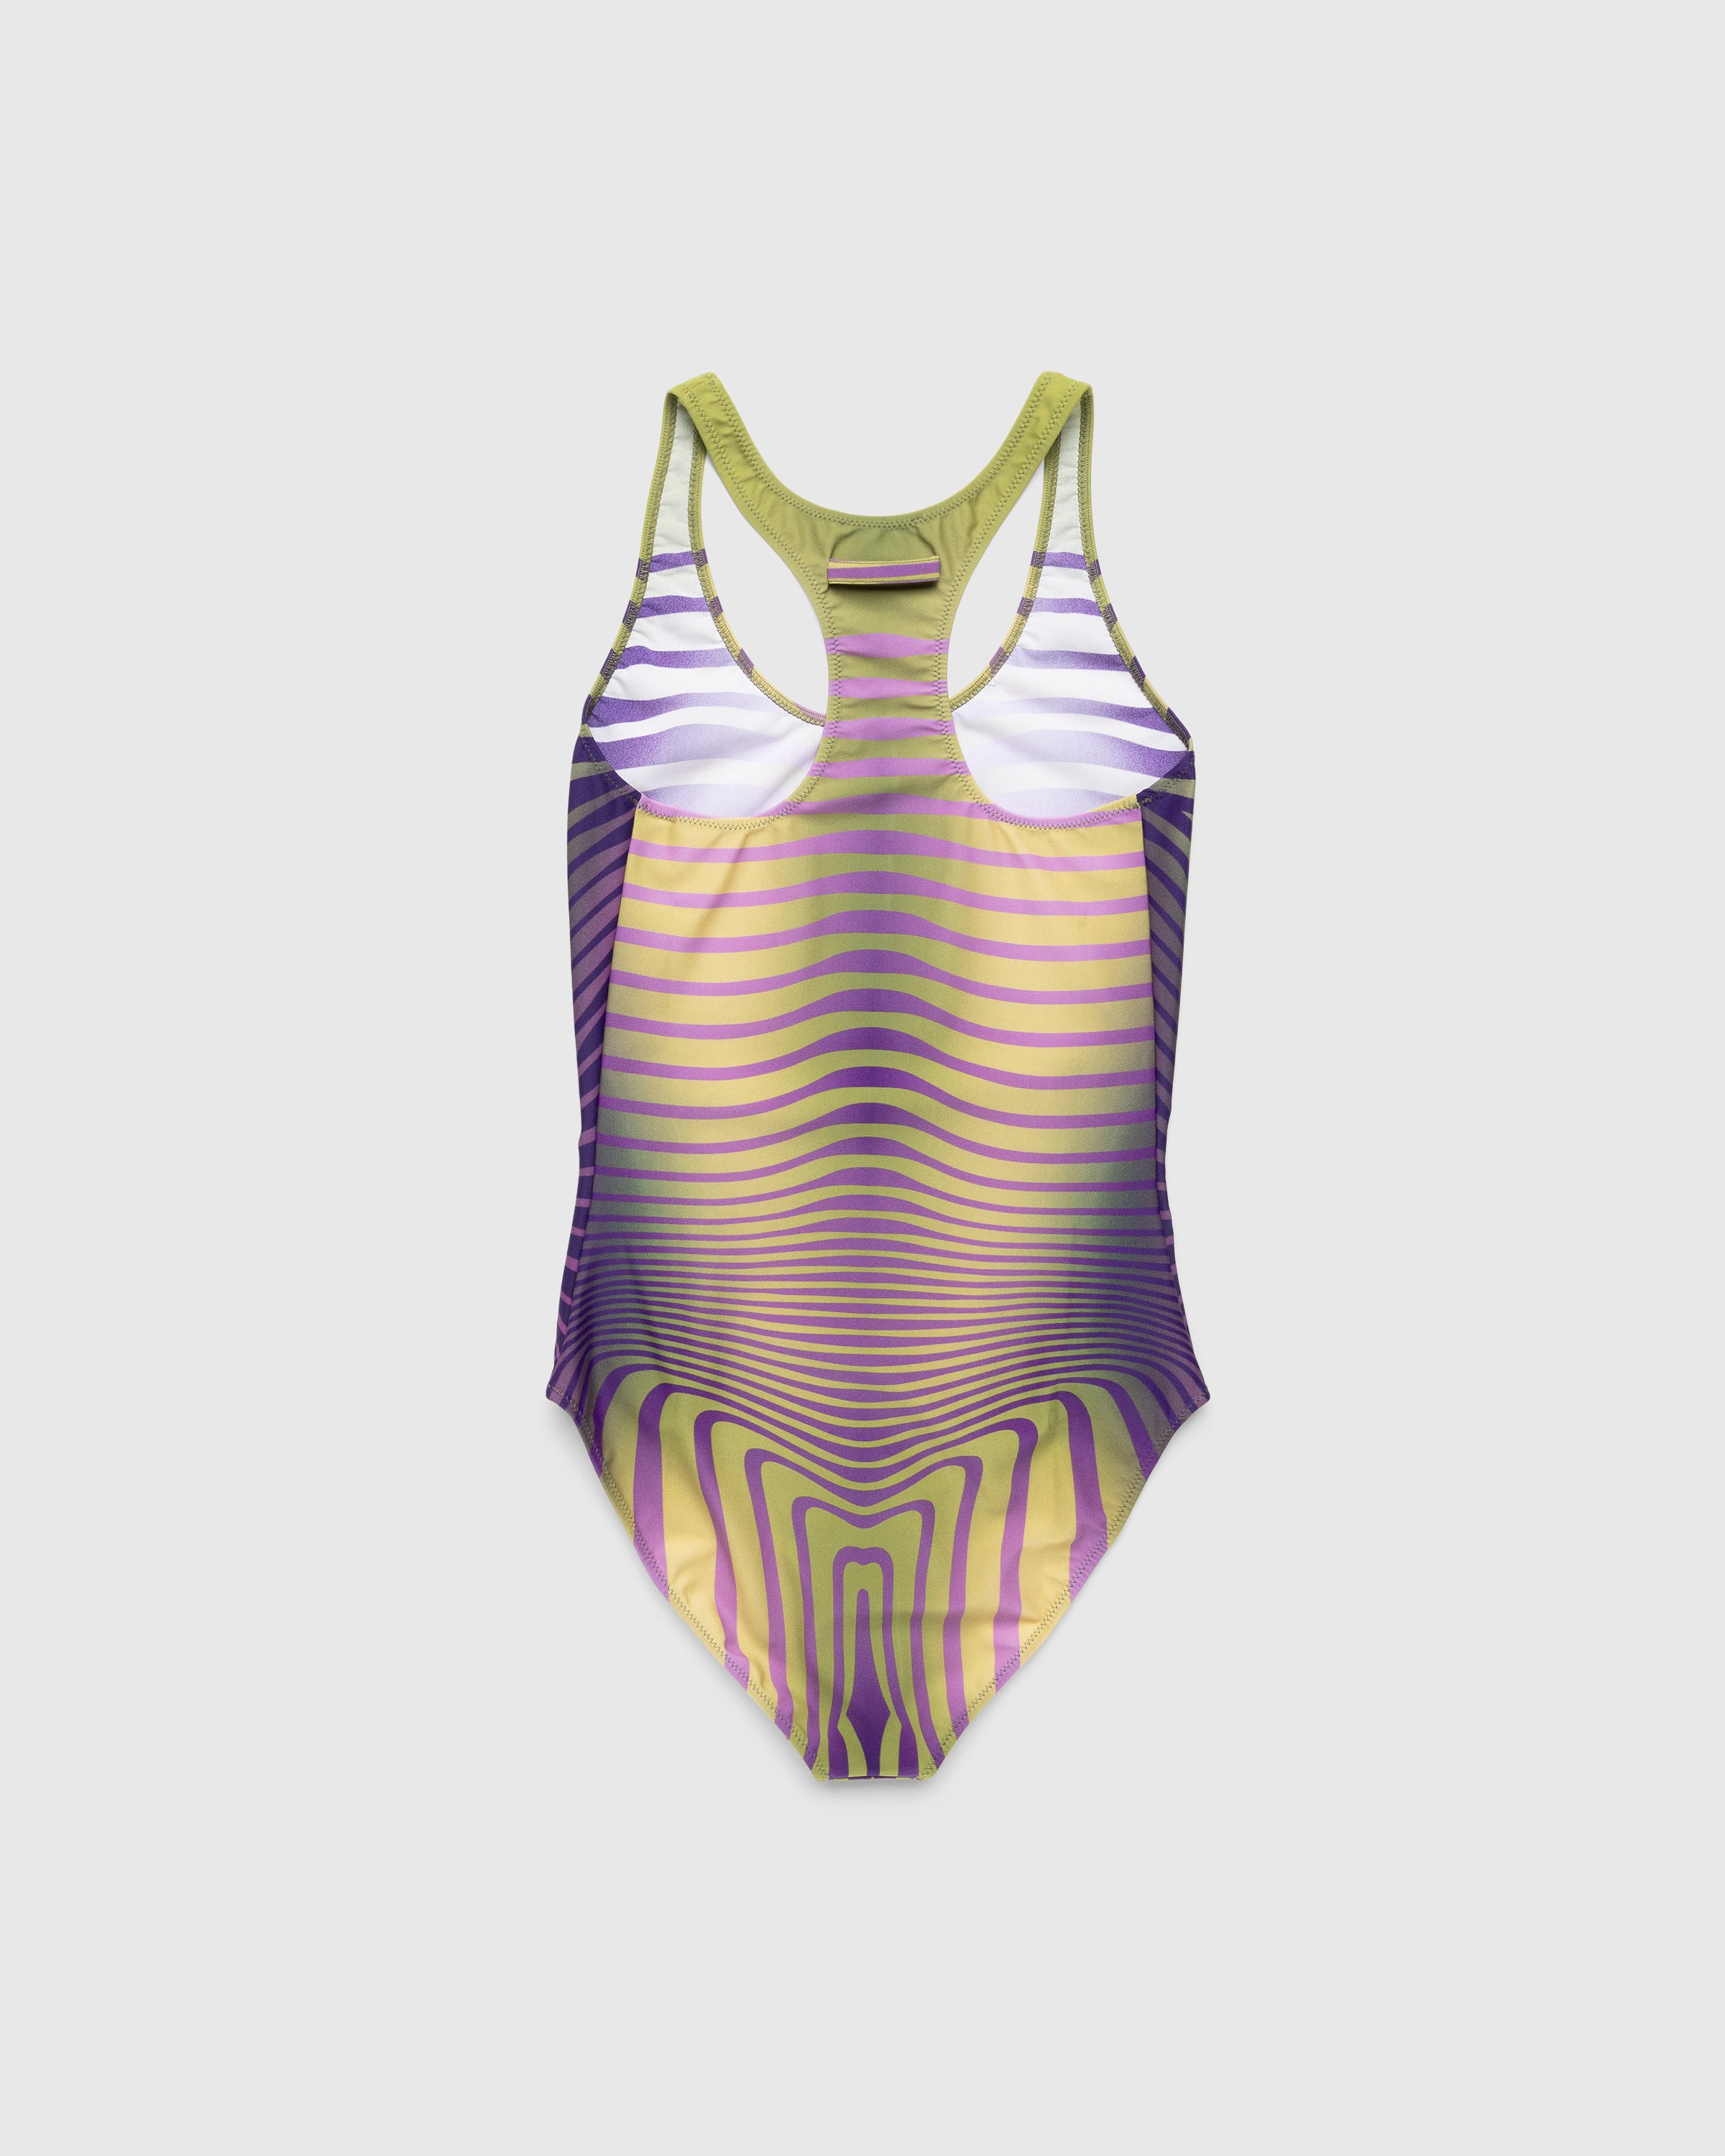 Jean Paul Gaultier - Printed Morphing Stripes Swimsuit Green - Clothing - Green - Image 2